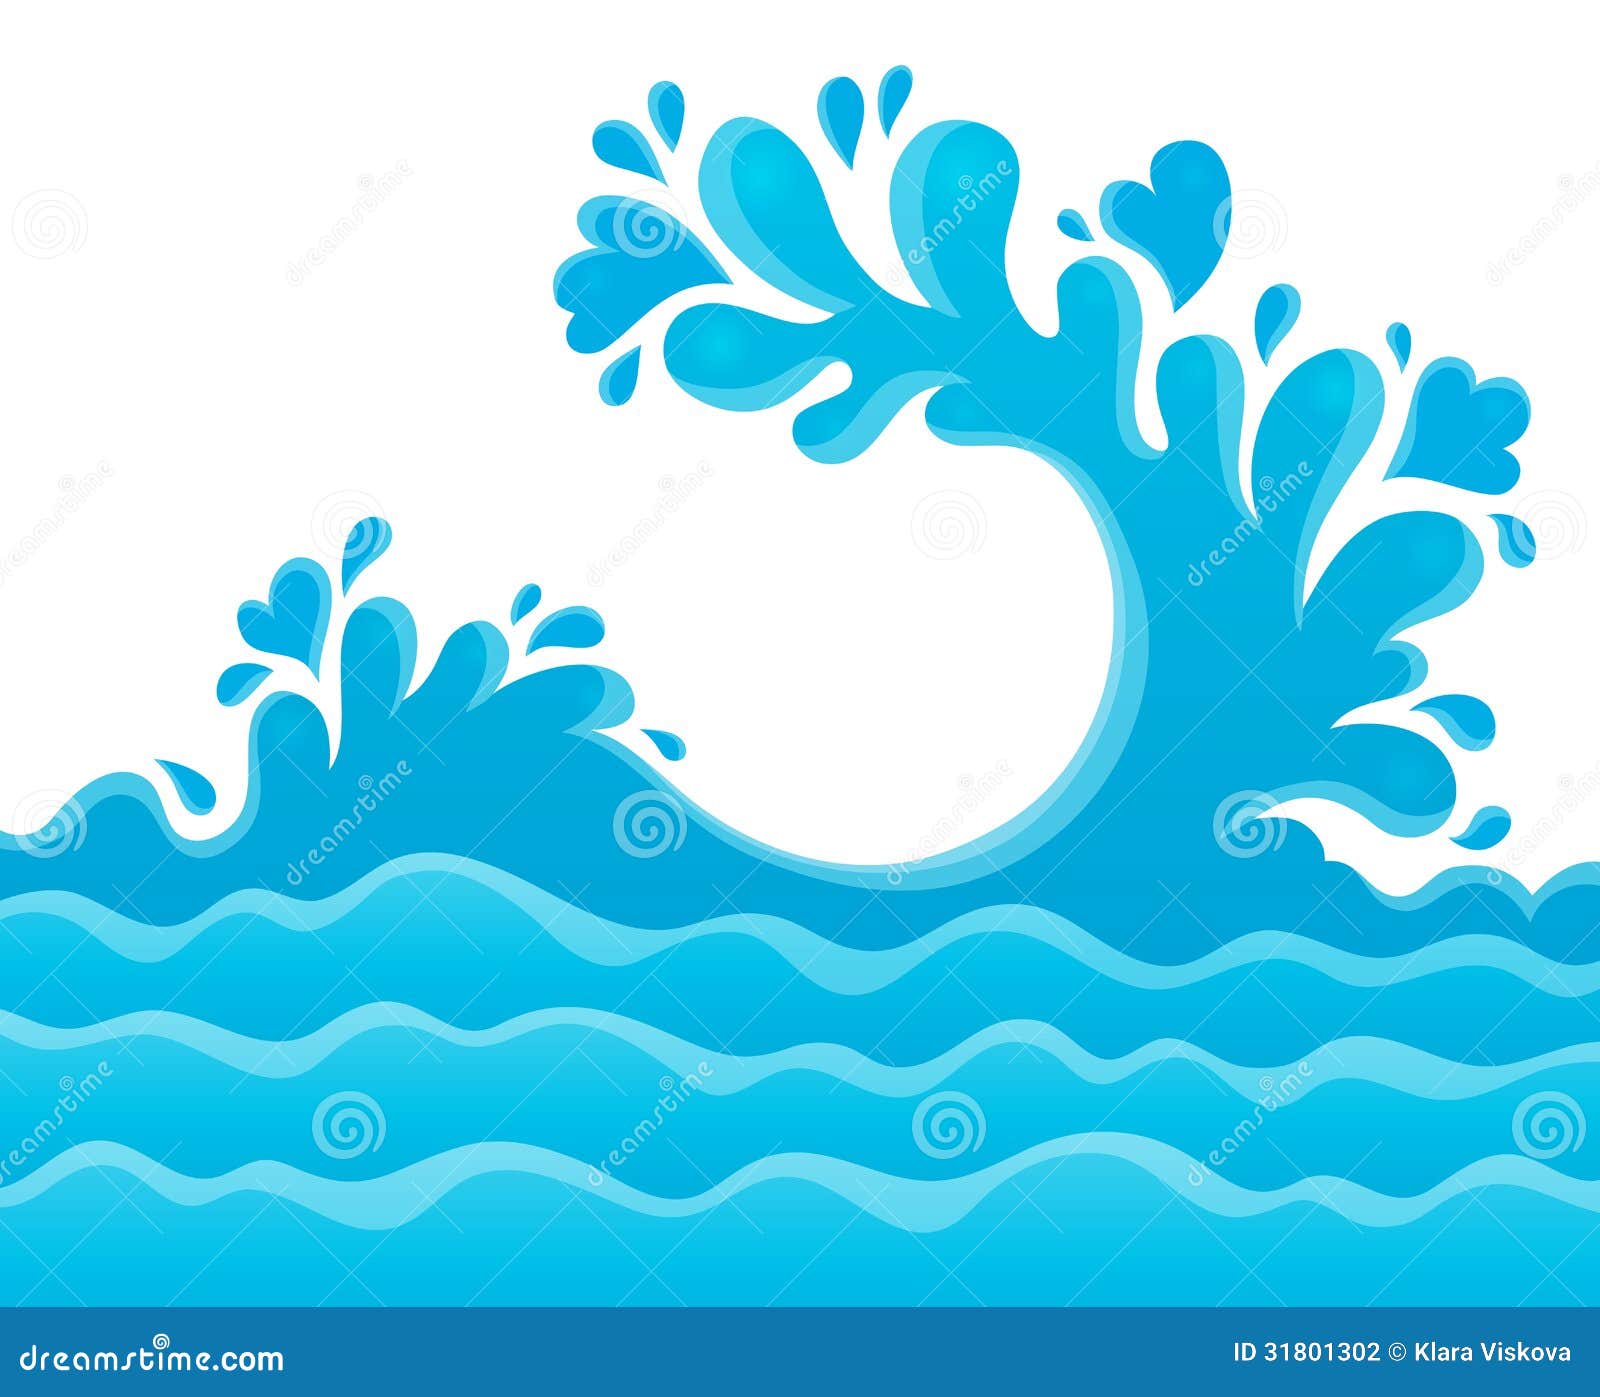 clipart water pictures - photo #44